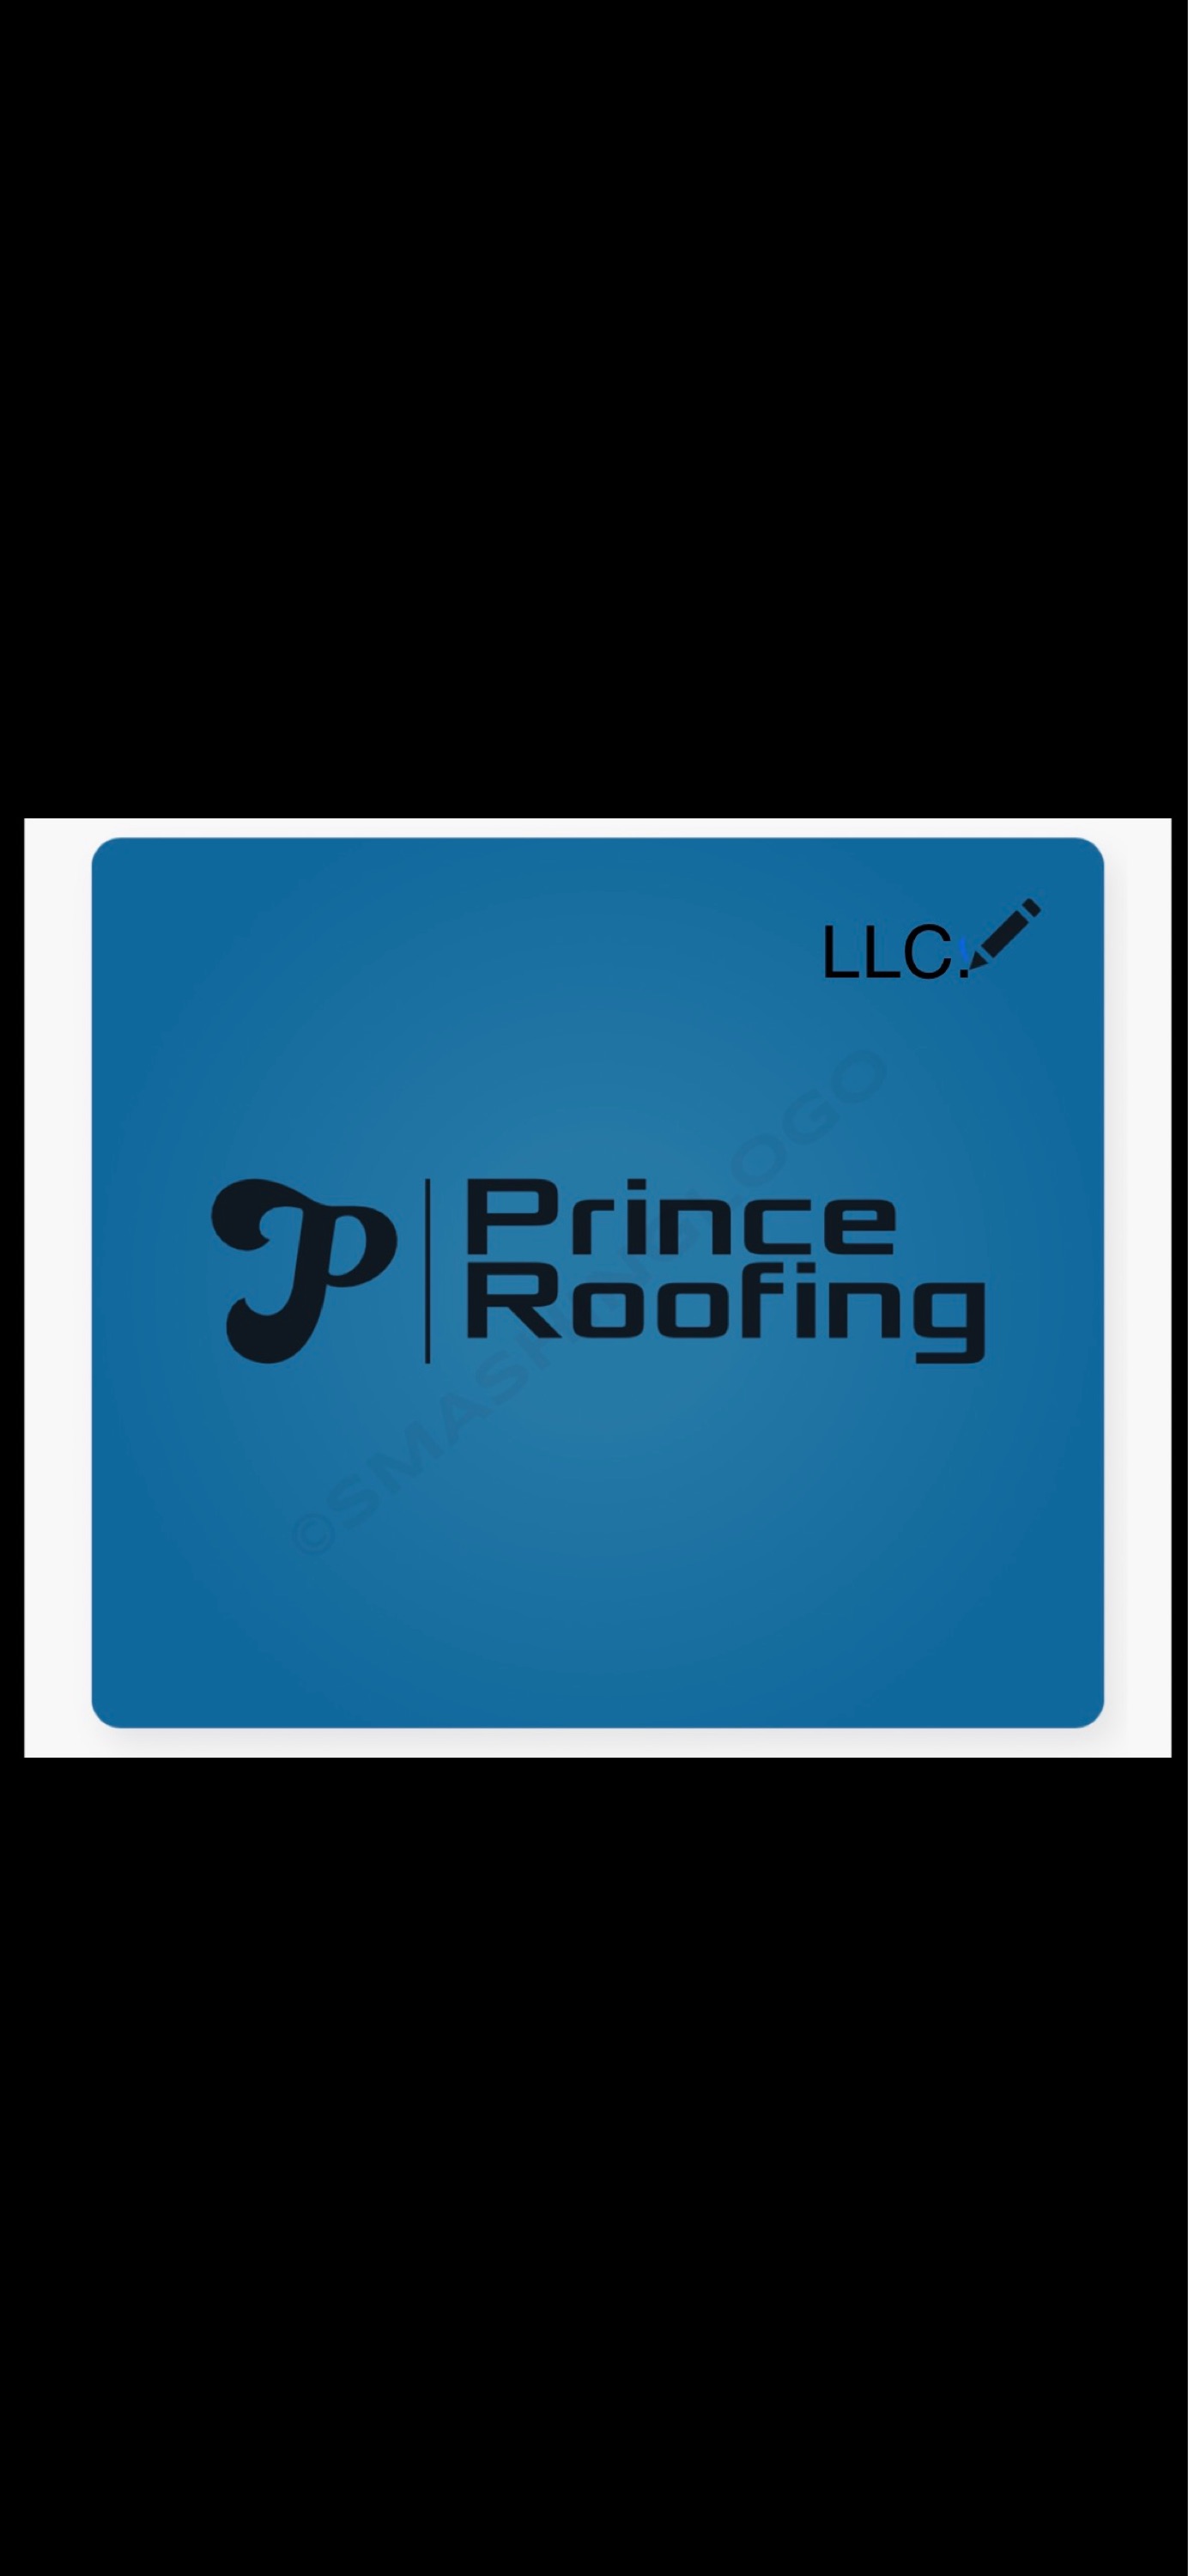 Prince Roofing Logo